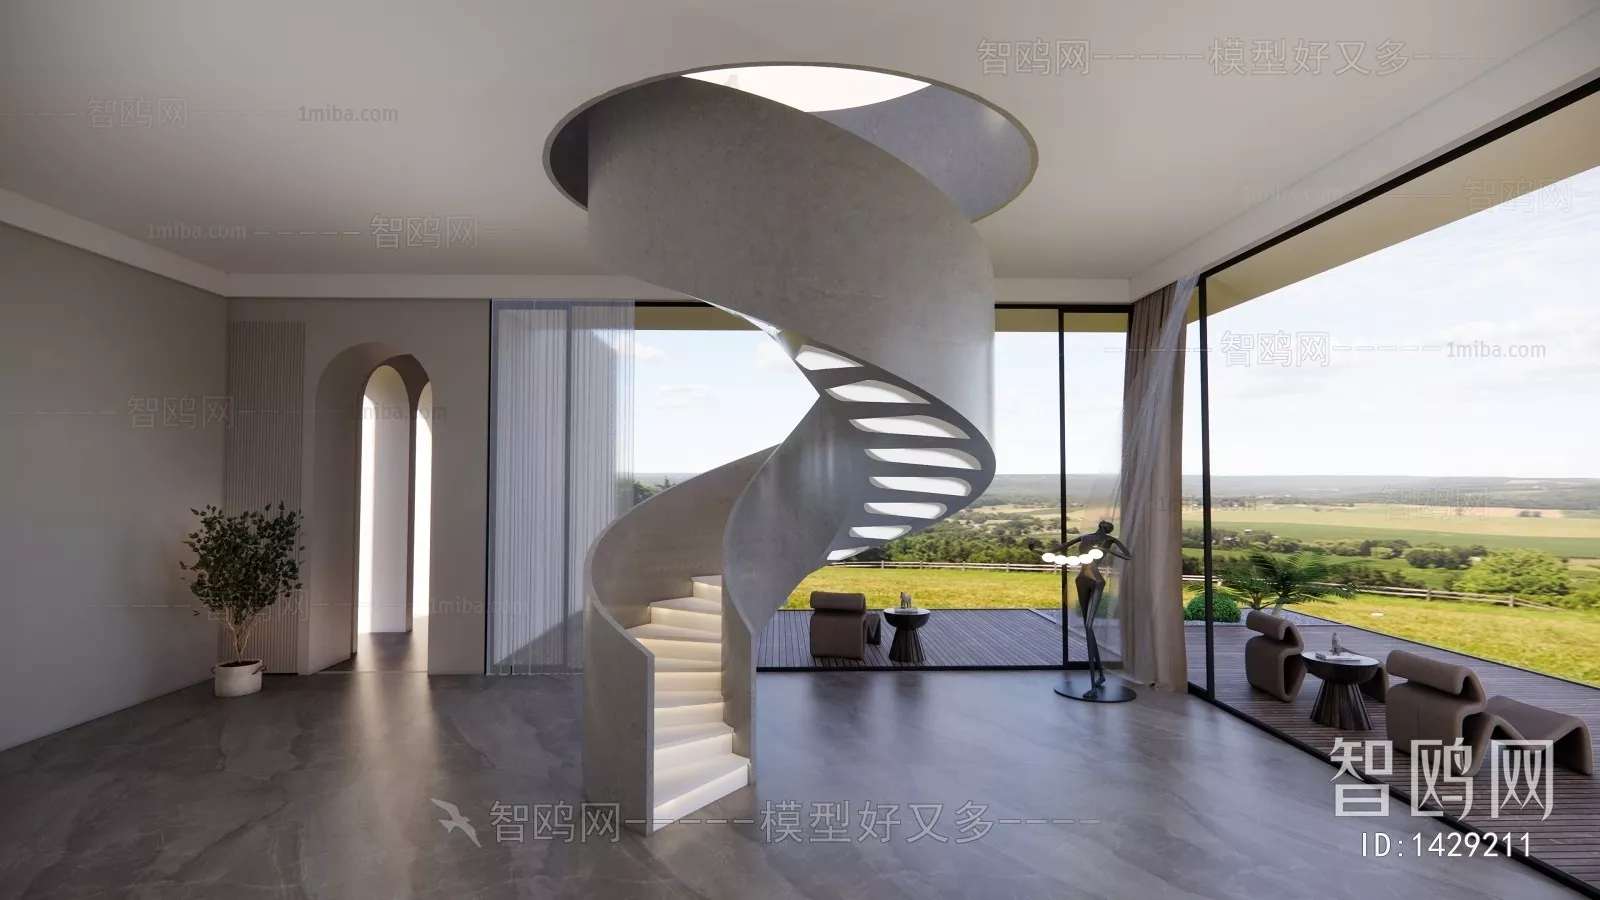 MODERN STAIR - SKETCHUP 3D MODEL - VRAY OR ENSCAPE - ID14317